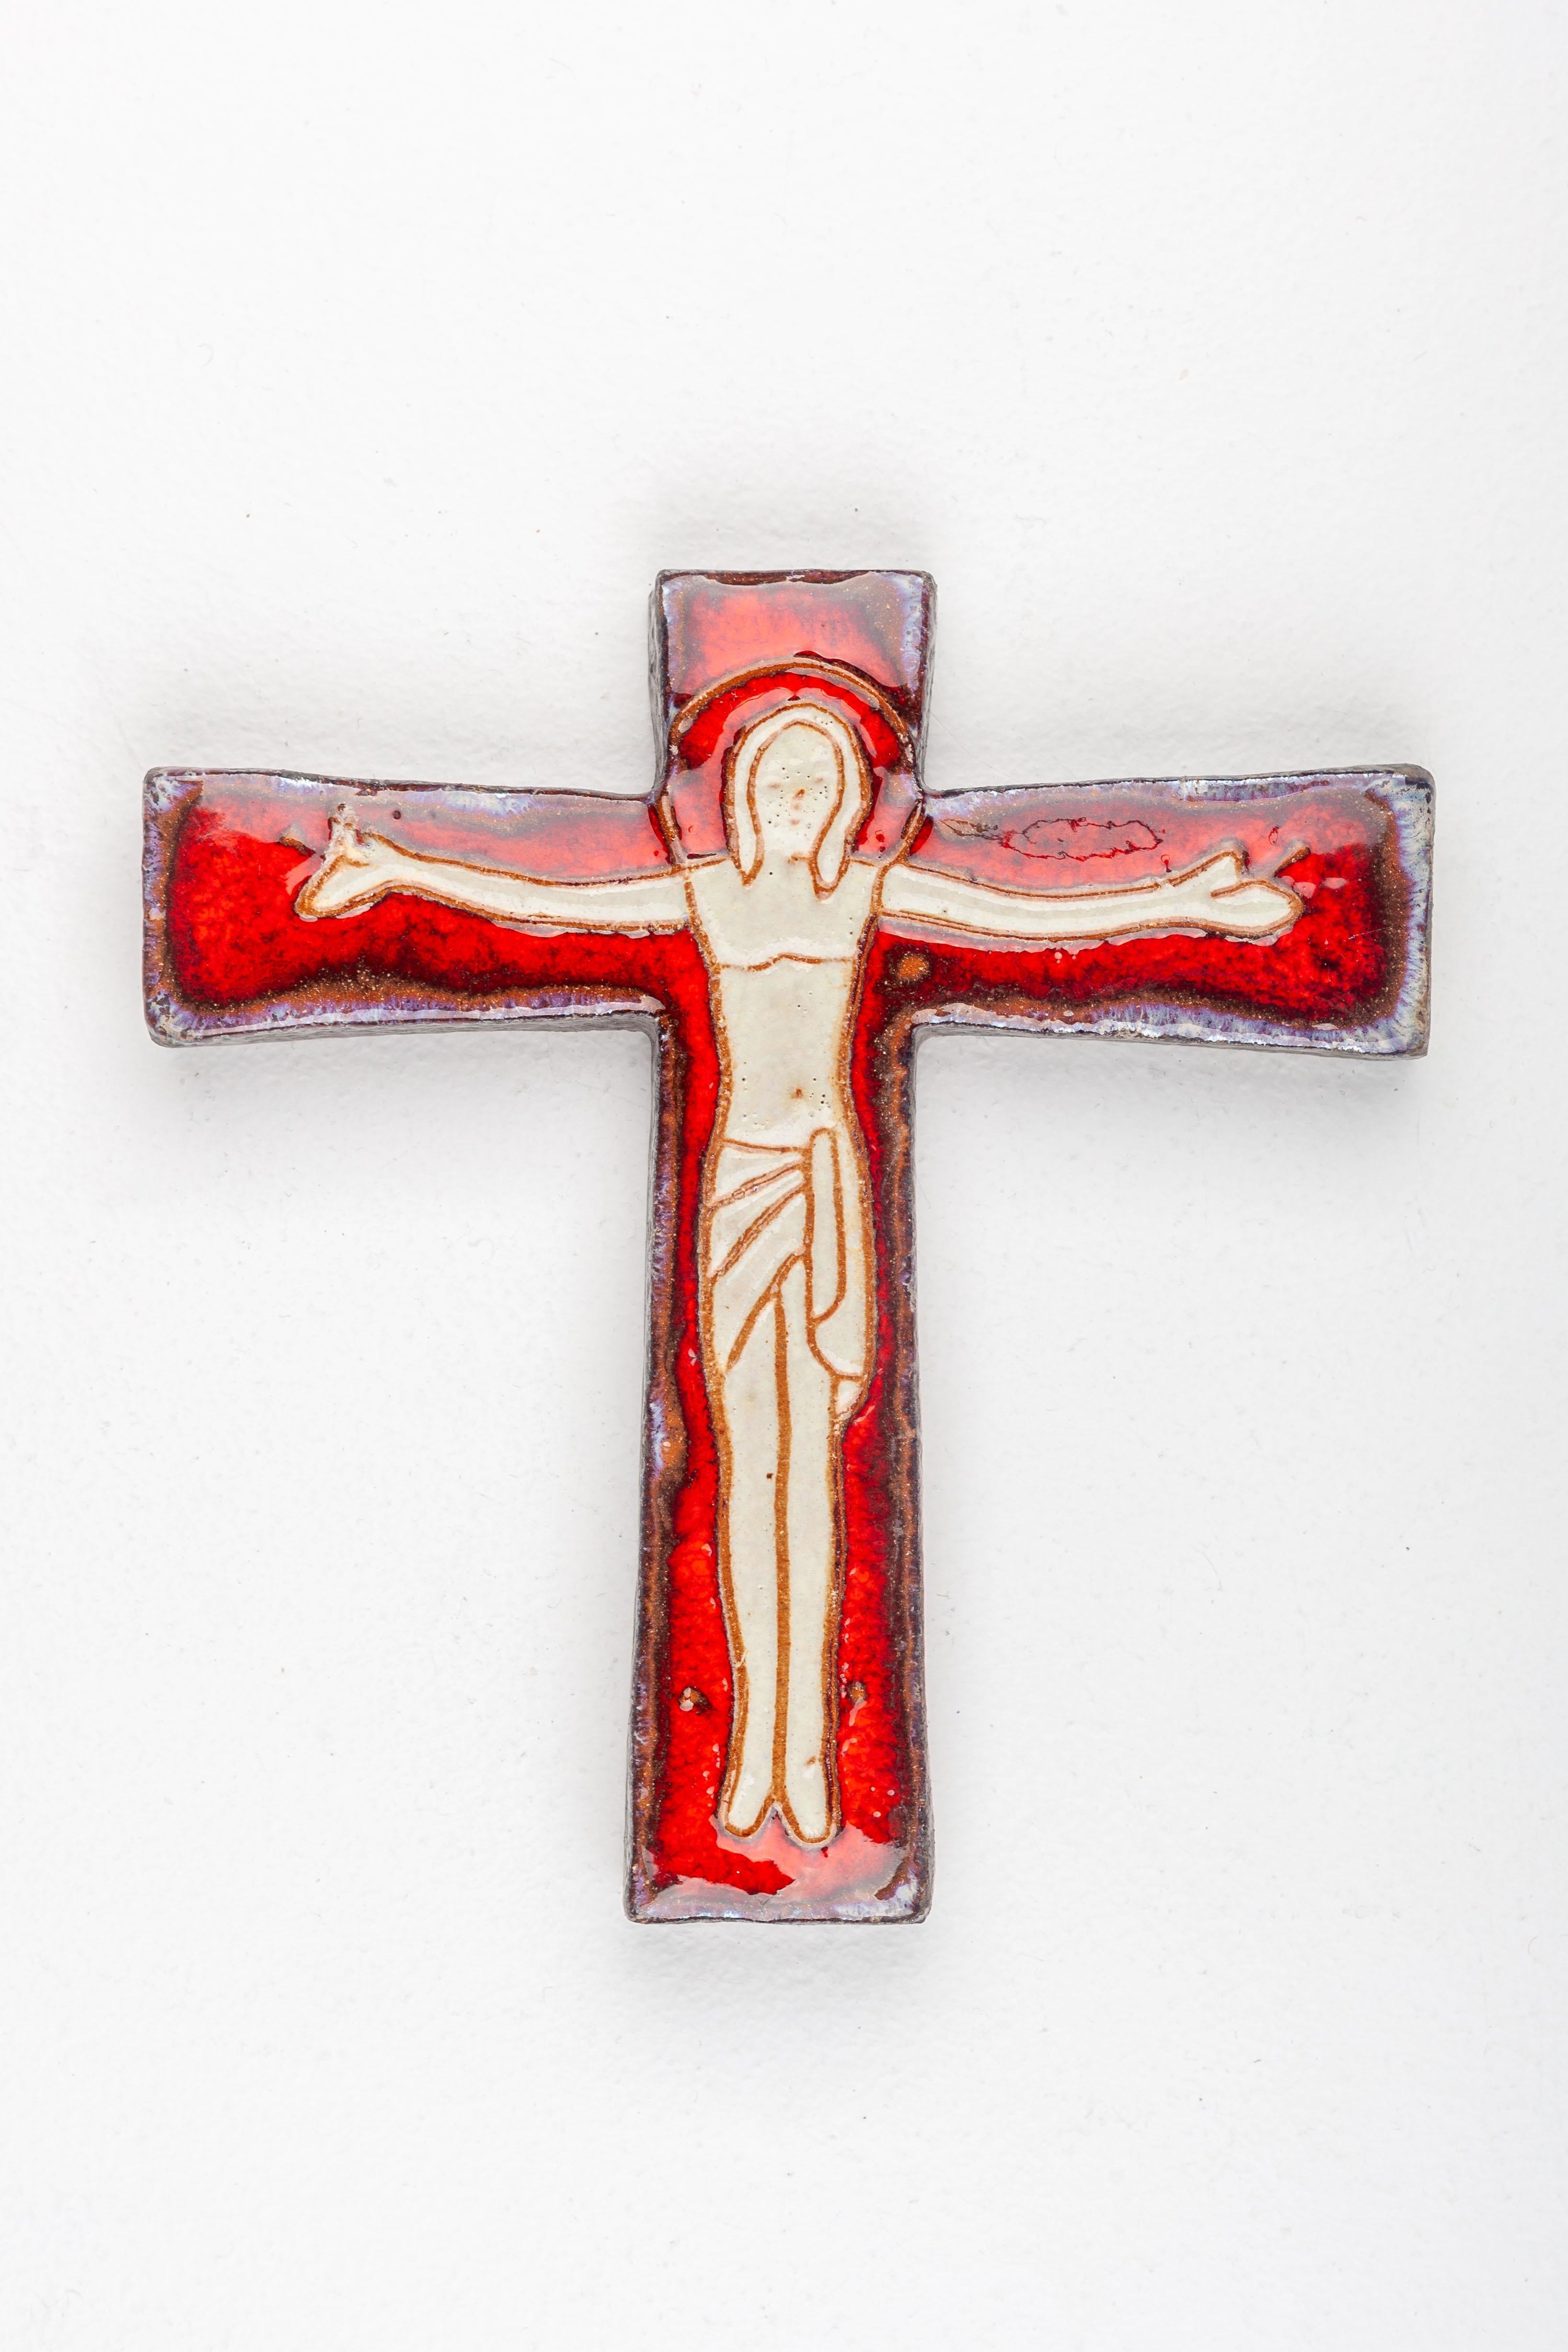 European Mid Century Ceramic Wall Cross, Red & Beige, Hand Made Studio Pottery, Europe For Sale